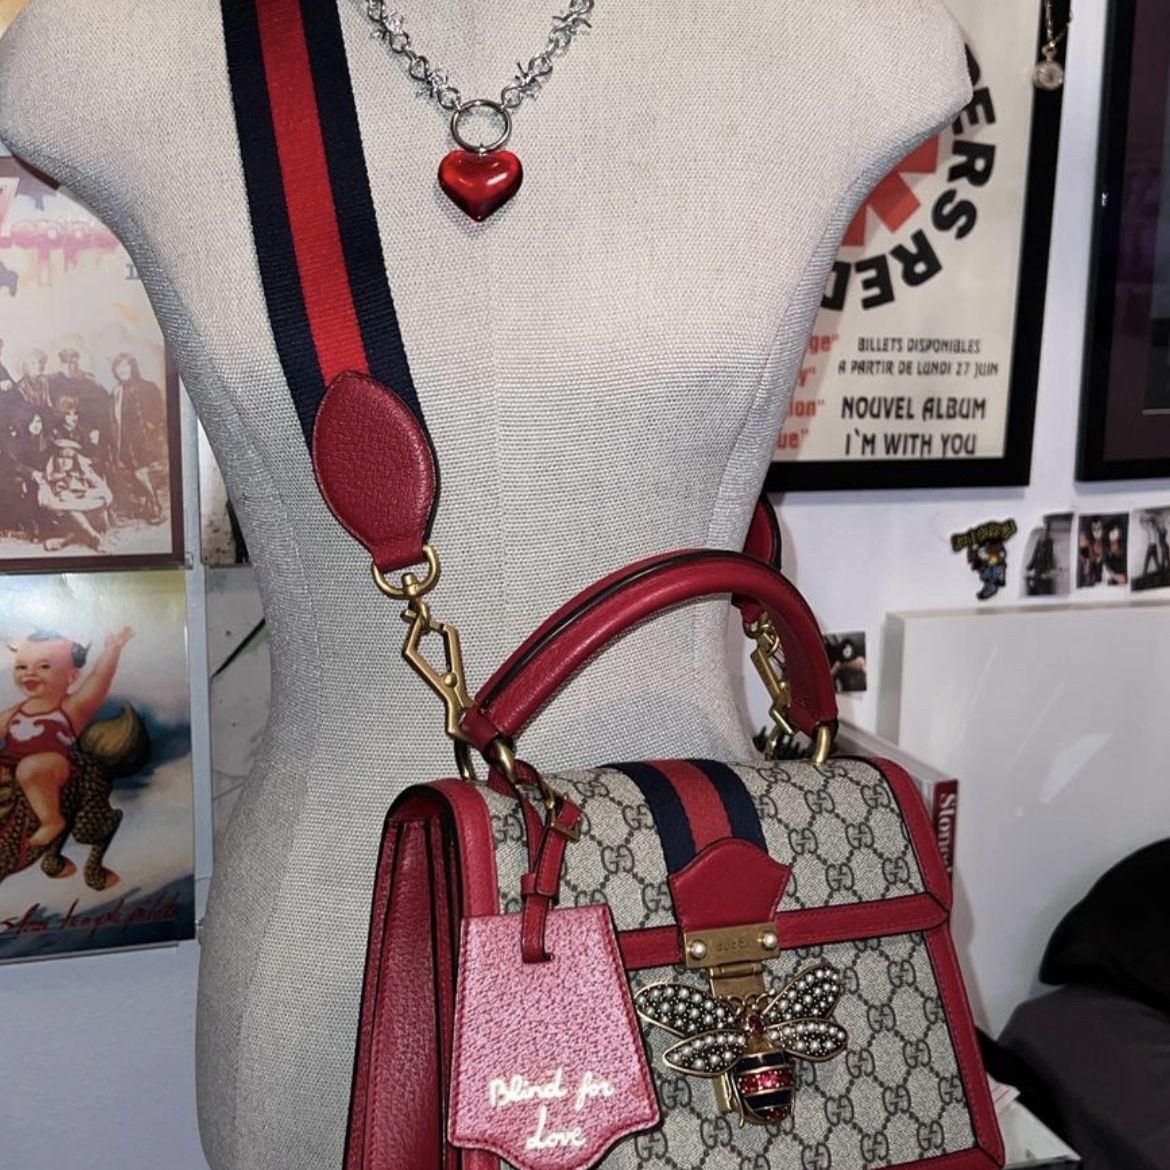 Like New Authentic Gucci GG Margaret Hand Bag